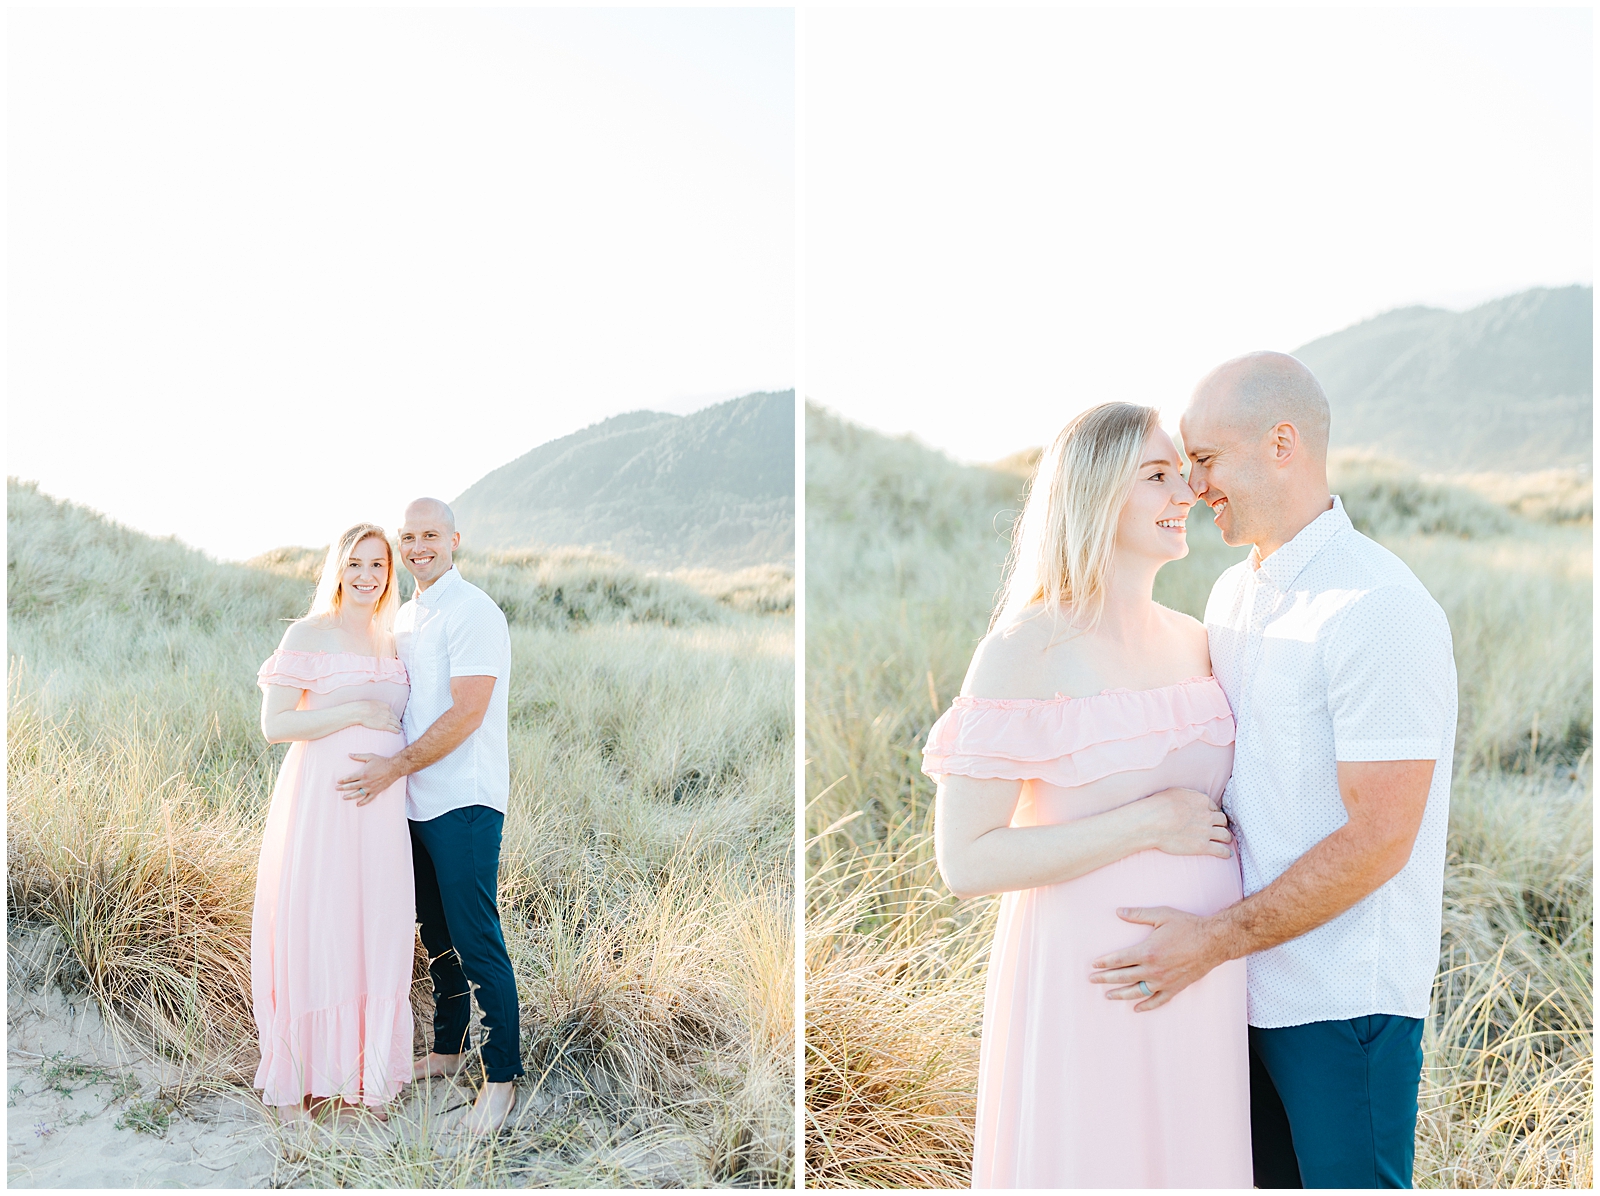 Oregon Coast Beach Maternity Session in Blush Dress in the Sand Dunes